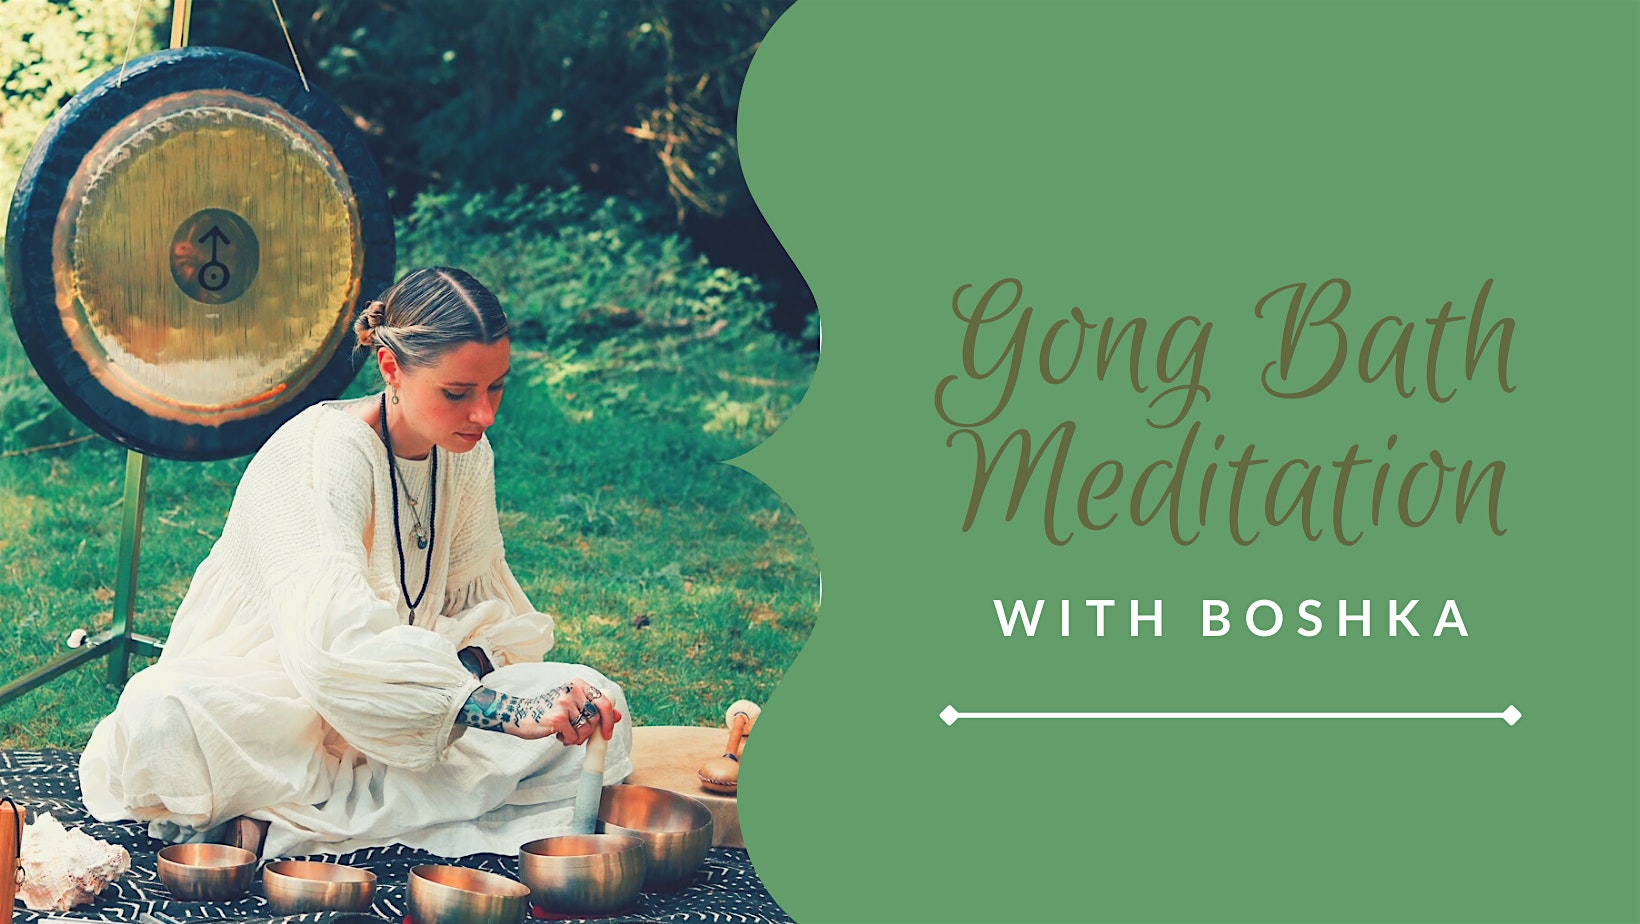 Gong Bath Meditation, 22 August | Event in Leeds | AllEvents.in